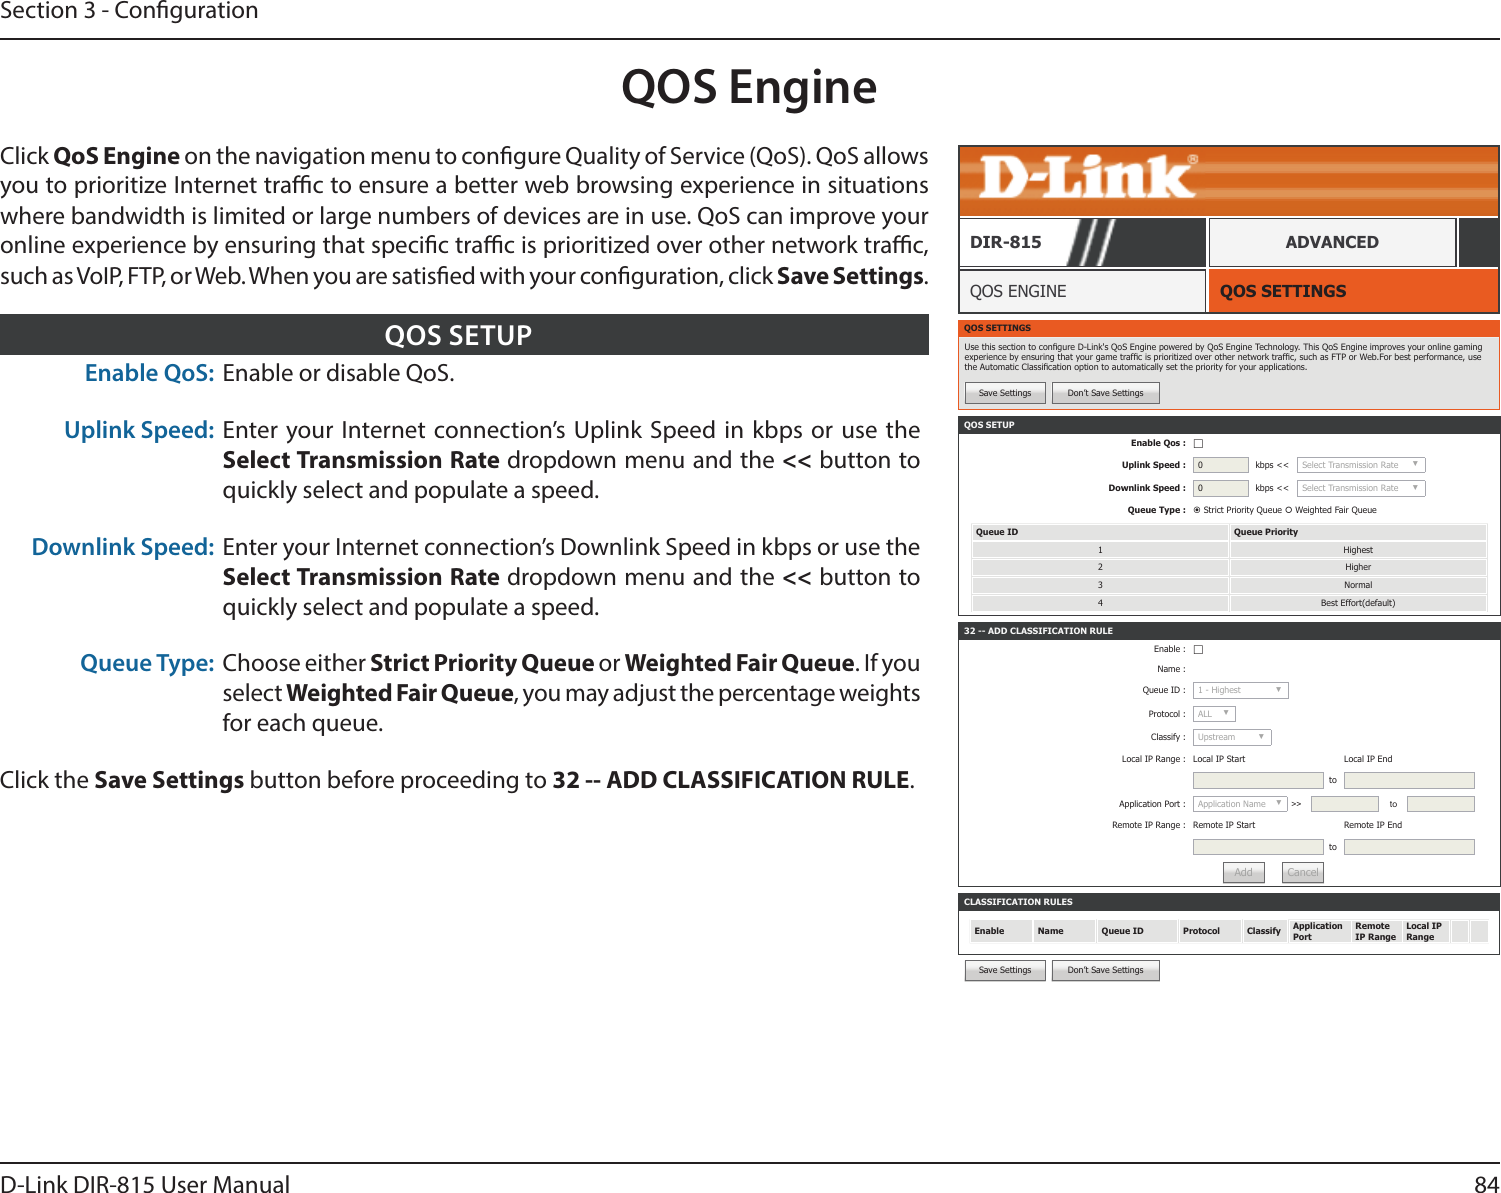 84D-Link DIR-815 User ManualSection 3 - CongurationQOS EngineQOS SETTINGSQOS ENGINEDIR-815 ADVANCEDClick QoS Engine on the navigation menu to congure Quality of Service (QoS). QoS allows you to prioritize Internet trac to ensure a better web browsing experience in situations where bandwidth is limited or large numbers of devices are in use. QoS can improve your online experience by ensuring that specic trac is prioritized over other network trac, such as VoIP, FTP, or Web. When you are satised with your conguration, click Save Settings.QOS SETTINGSUse this section to congure D-Link&apos;s QoS Engine powered by QoS Engine Technology. This QoS Engine improves your online gaming experience by ensuring that your game trafc is prioritized over other network trafc, such as FTP or Web.For best performance, use the Automatic Classication option to automatically set the priority for your applications.Save Settings Don’t Save SettingsCLASSIFICATION RULESEnable Name Queue ID Protocol Classify Application PortRemote IP RangeLocal IP Range32 -- ADD CLASSIFICATION RULEEnable : ☐Name :Queue ID : 1 - Highest ▼Protocol : ALL ▼Classify : Upstream ▼Local IP Range : Local IP Start Local IP EndtoApplication Port : Application Name ▼&gt;&gt; toRemote IP Range : Remote IP Start Remote IP EndtoAdd CancelSave Settings Don’t Save SettingsEnable QoS: Enable or disable QoS.Uplink Speed: Enter your Internet connection’s Uplink Speed in kbps or use the Select Transmission Rate dropdown menu and the &lt;&lt; button to quickly select and populate a speed.Downlink Speed: Enter your Internet connection’s Downlink Speed in kbps or use the Select Transmission Rate dropdown menu and the &lt;&lt; button to quickly select and populate a speed.Queue Type: Choose either Strict Priority Queue or Weighted Fair Queue. If you select Weighted Fair Queue, you may adjust the percentage weights for each queue.Click the Save Settings button before proceeding to 32 -- ADD CLASSIFICATION RULE.QOS SETUPQOS SETUPEnable Qos : ☐Uplink Speed : 0kbps &lt;&lt; Select Transmission Rate ▼Downlink Speed : 0kbps &lt;&lt; Select Transmission Rate ▼Queue Type :  Strict Priority Queue  Weighted Fair QueueQueue ID Queue Priority1 Highest2 Higher3 Normal4 Best Effort(default)